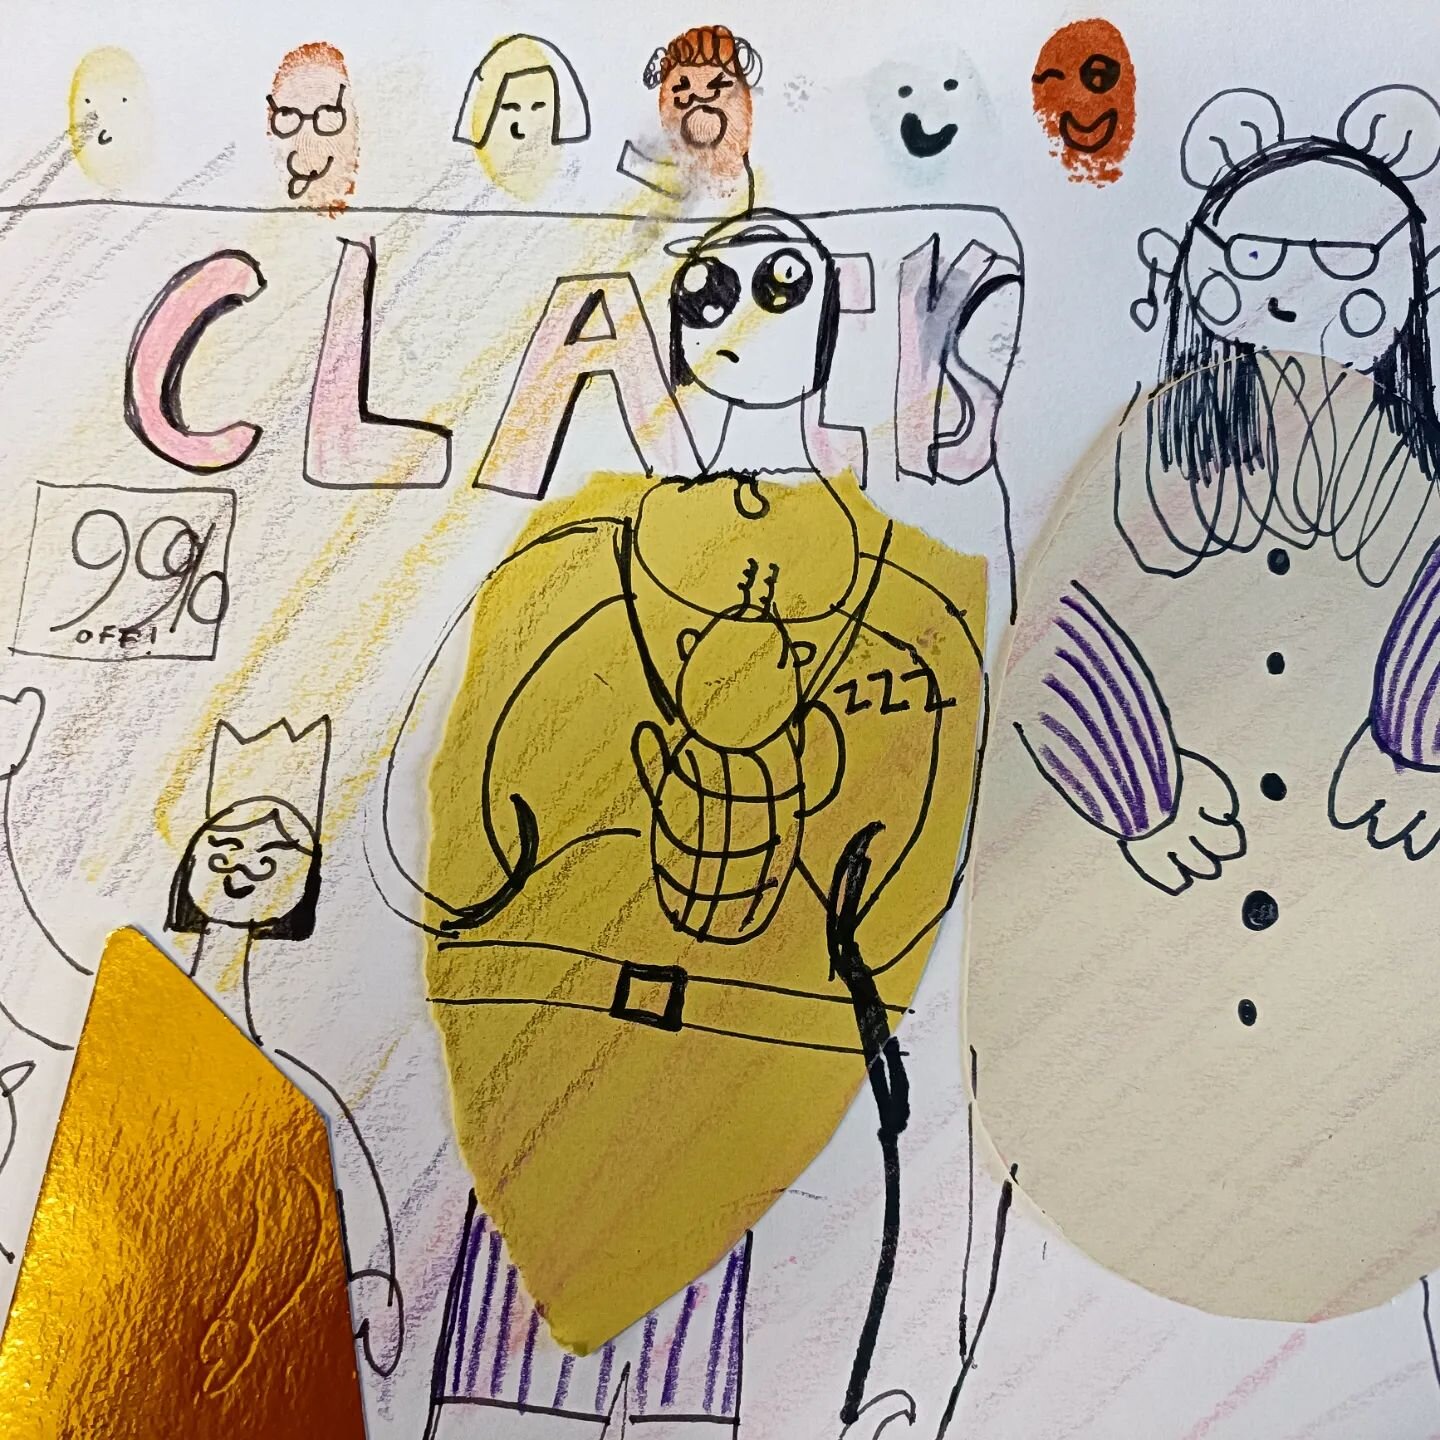 A crowd of city characters from our young artist last week! Creative play with shapes and finger printing. ❤️

Bookings are open  for our spring term Wednesday afterschool class in Seaford. DM for details 🙂

#characters #illustration #youngillustrat